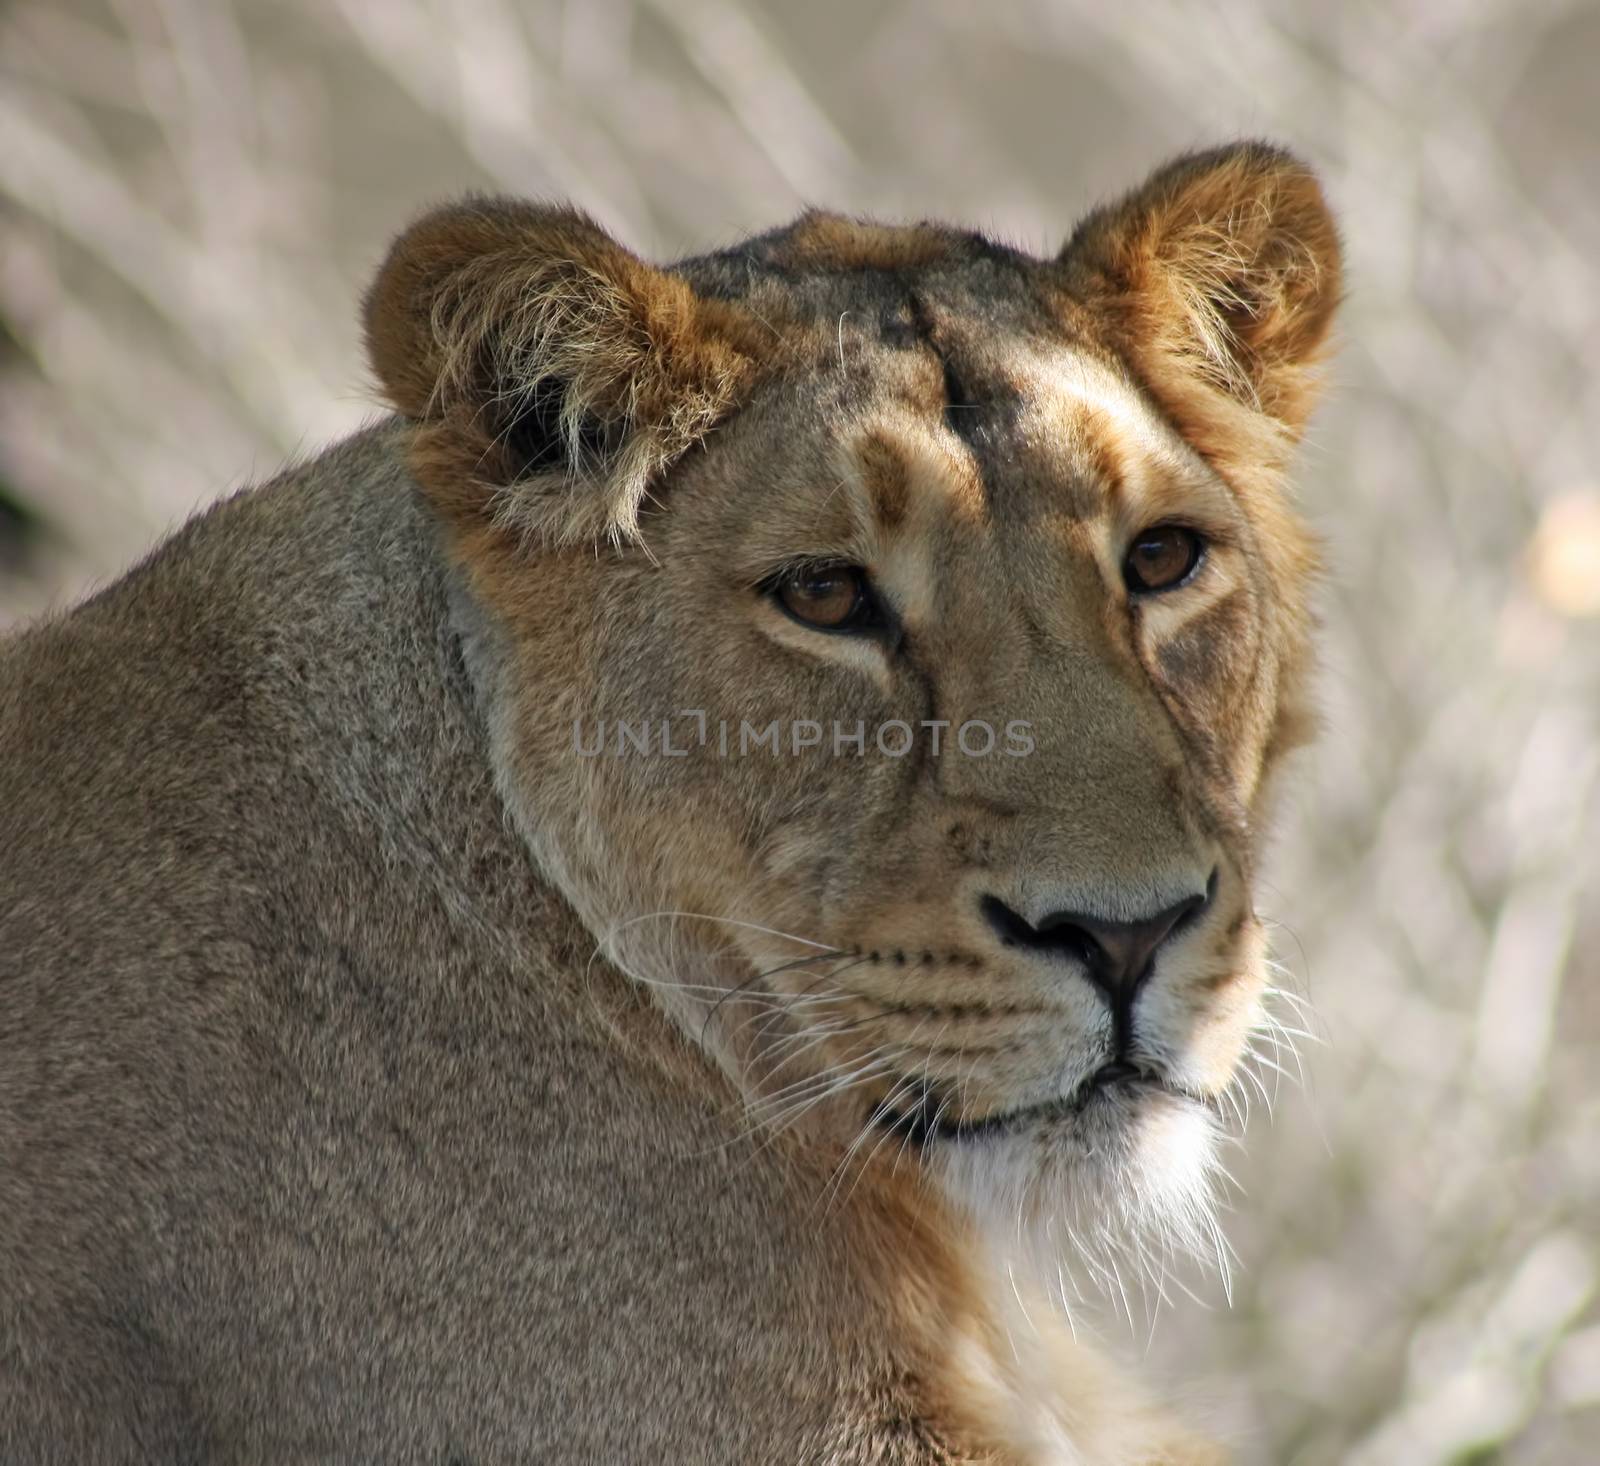 lioness by potts312